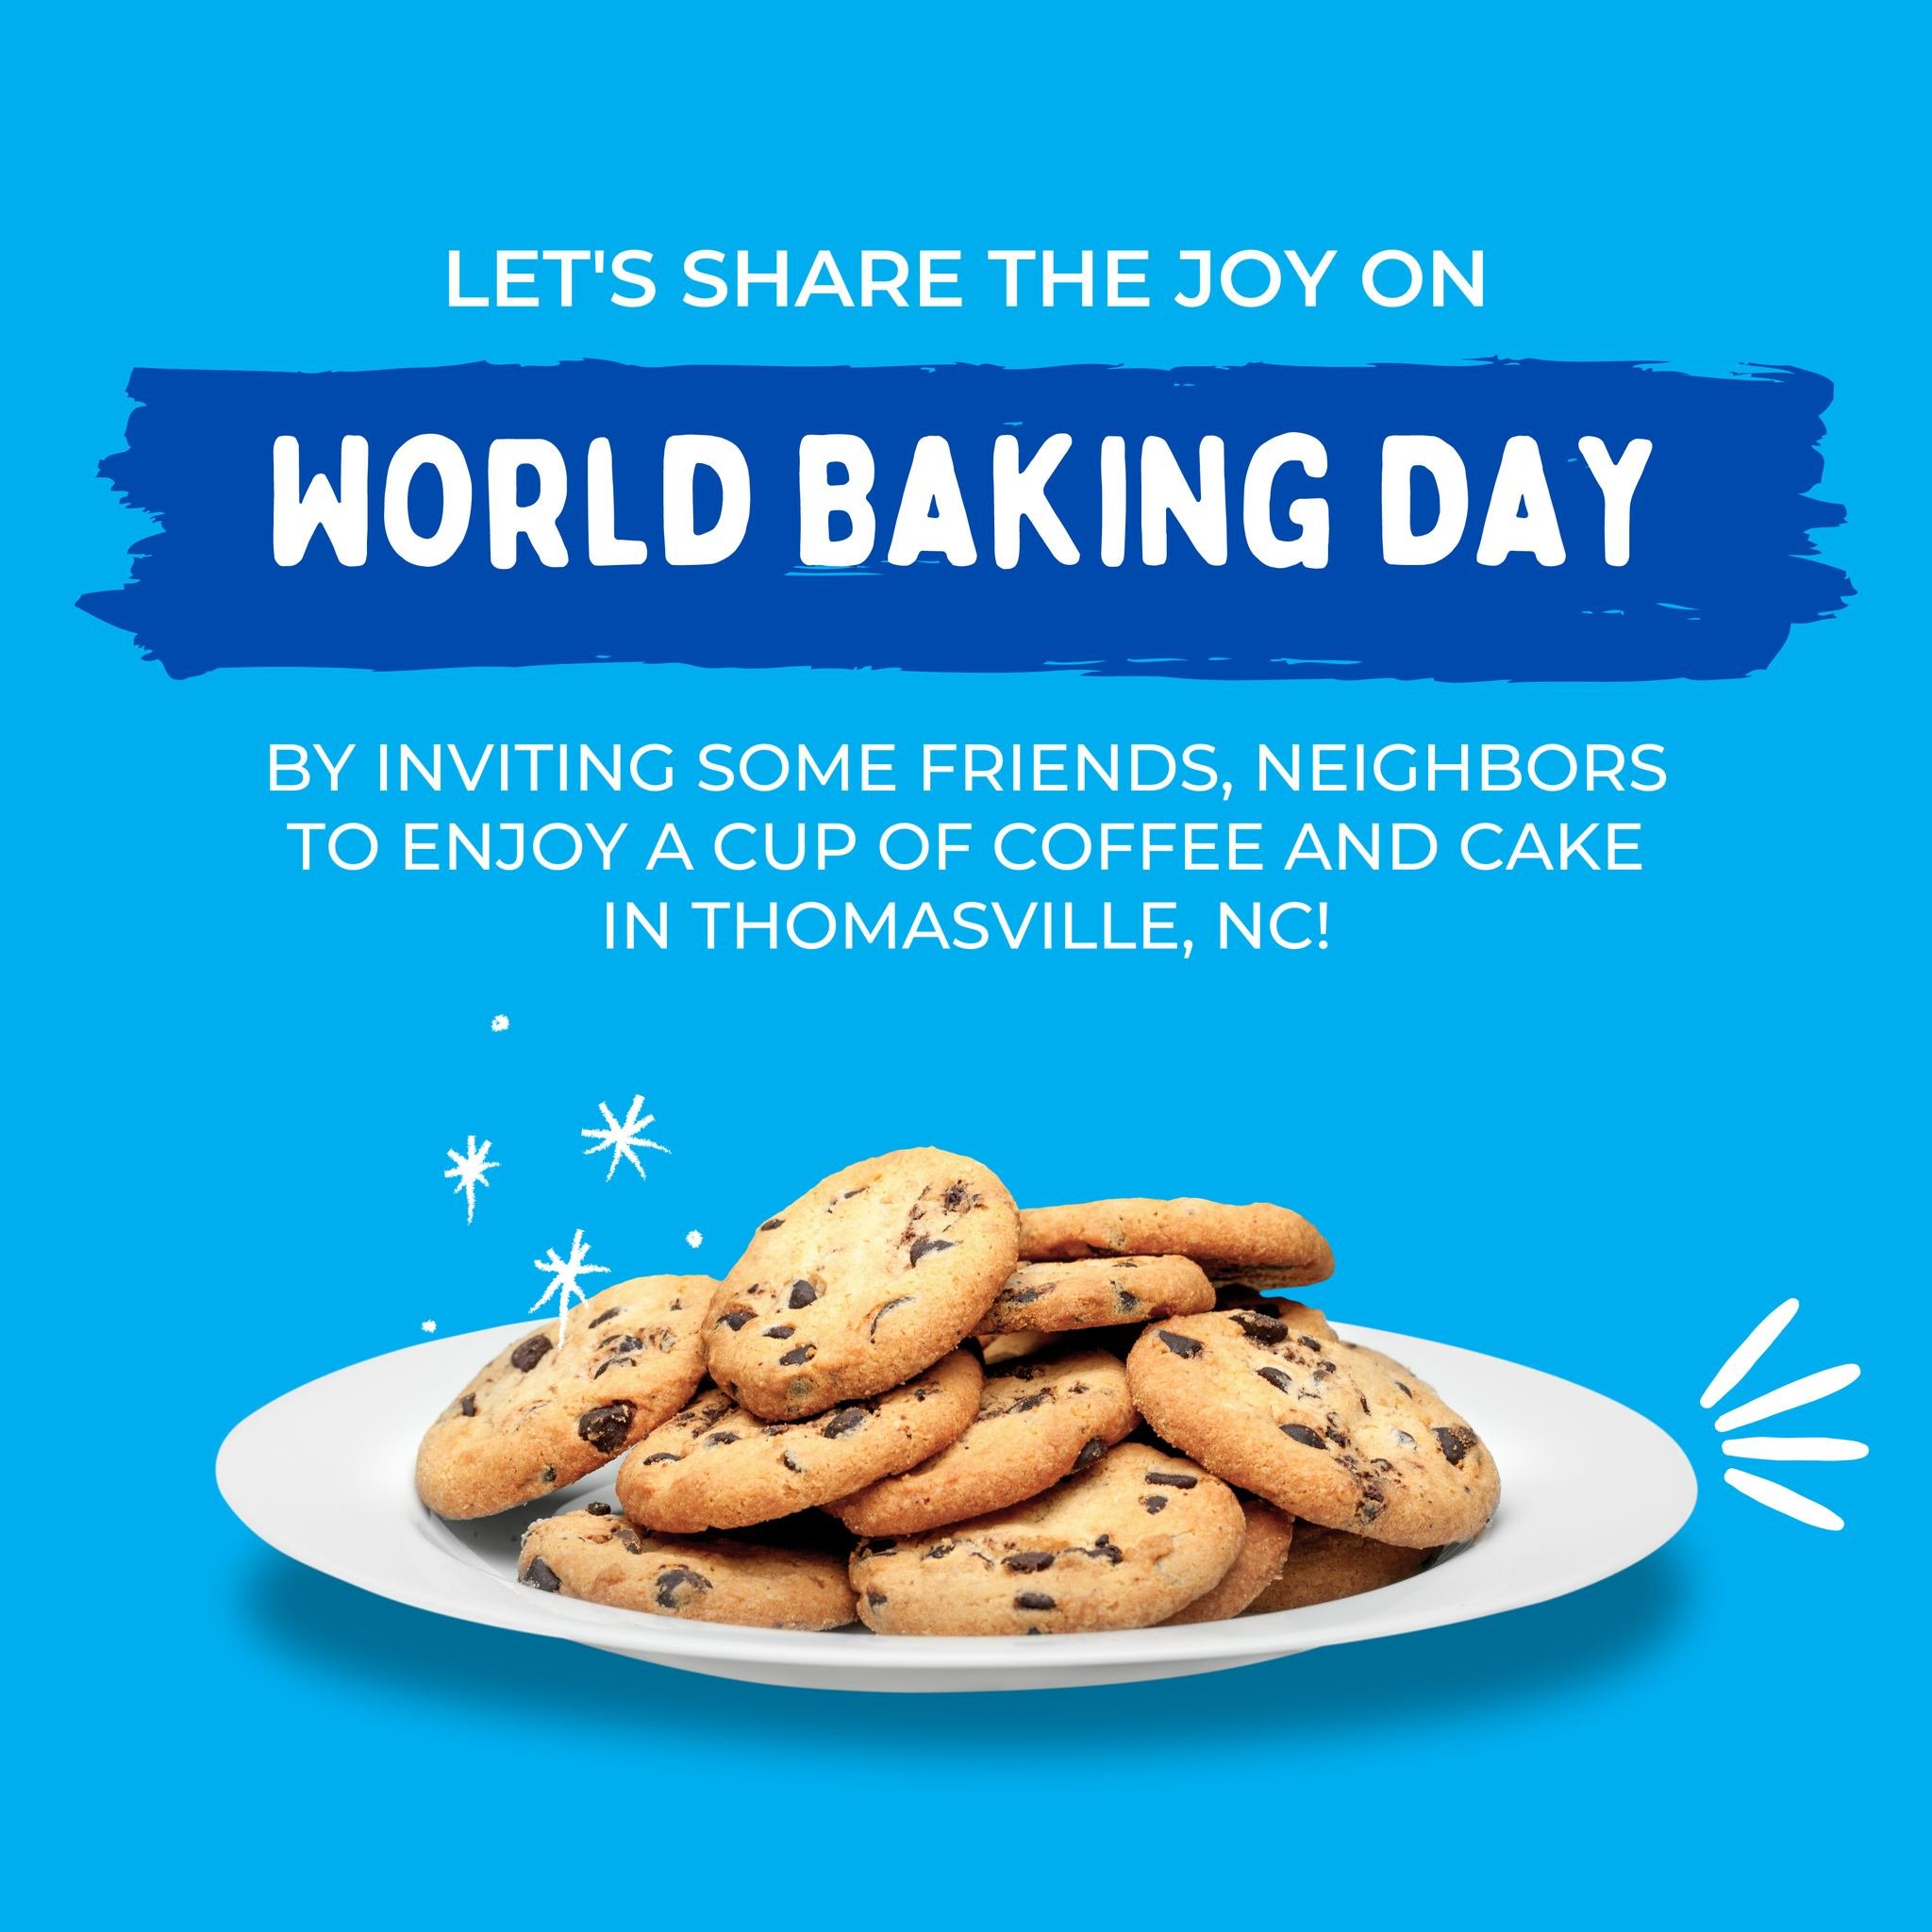 It's World Baking Day! Community let's share the best places to get delicious coffee, cake, and desserts in Thomasville! Comment down below!
.
.
.
#thomasville #thomasvillenctourism #thomasvillenc #bigchair #visitthomasvillenc #nctravel #visitthomasv